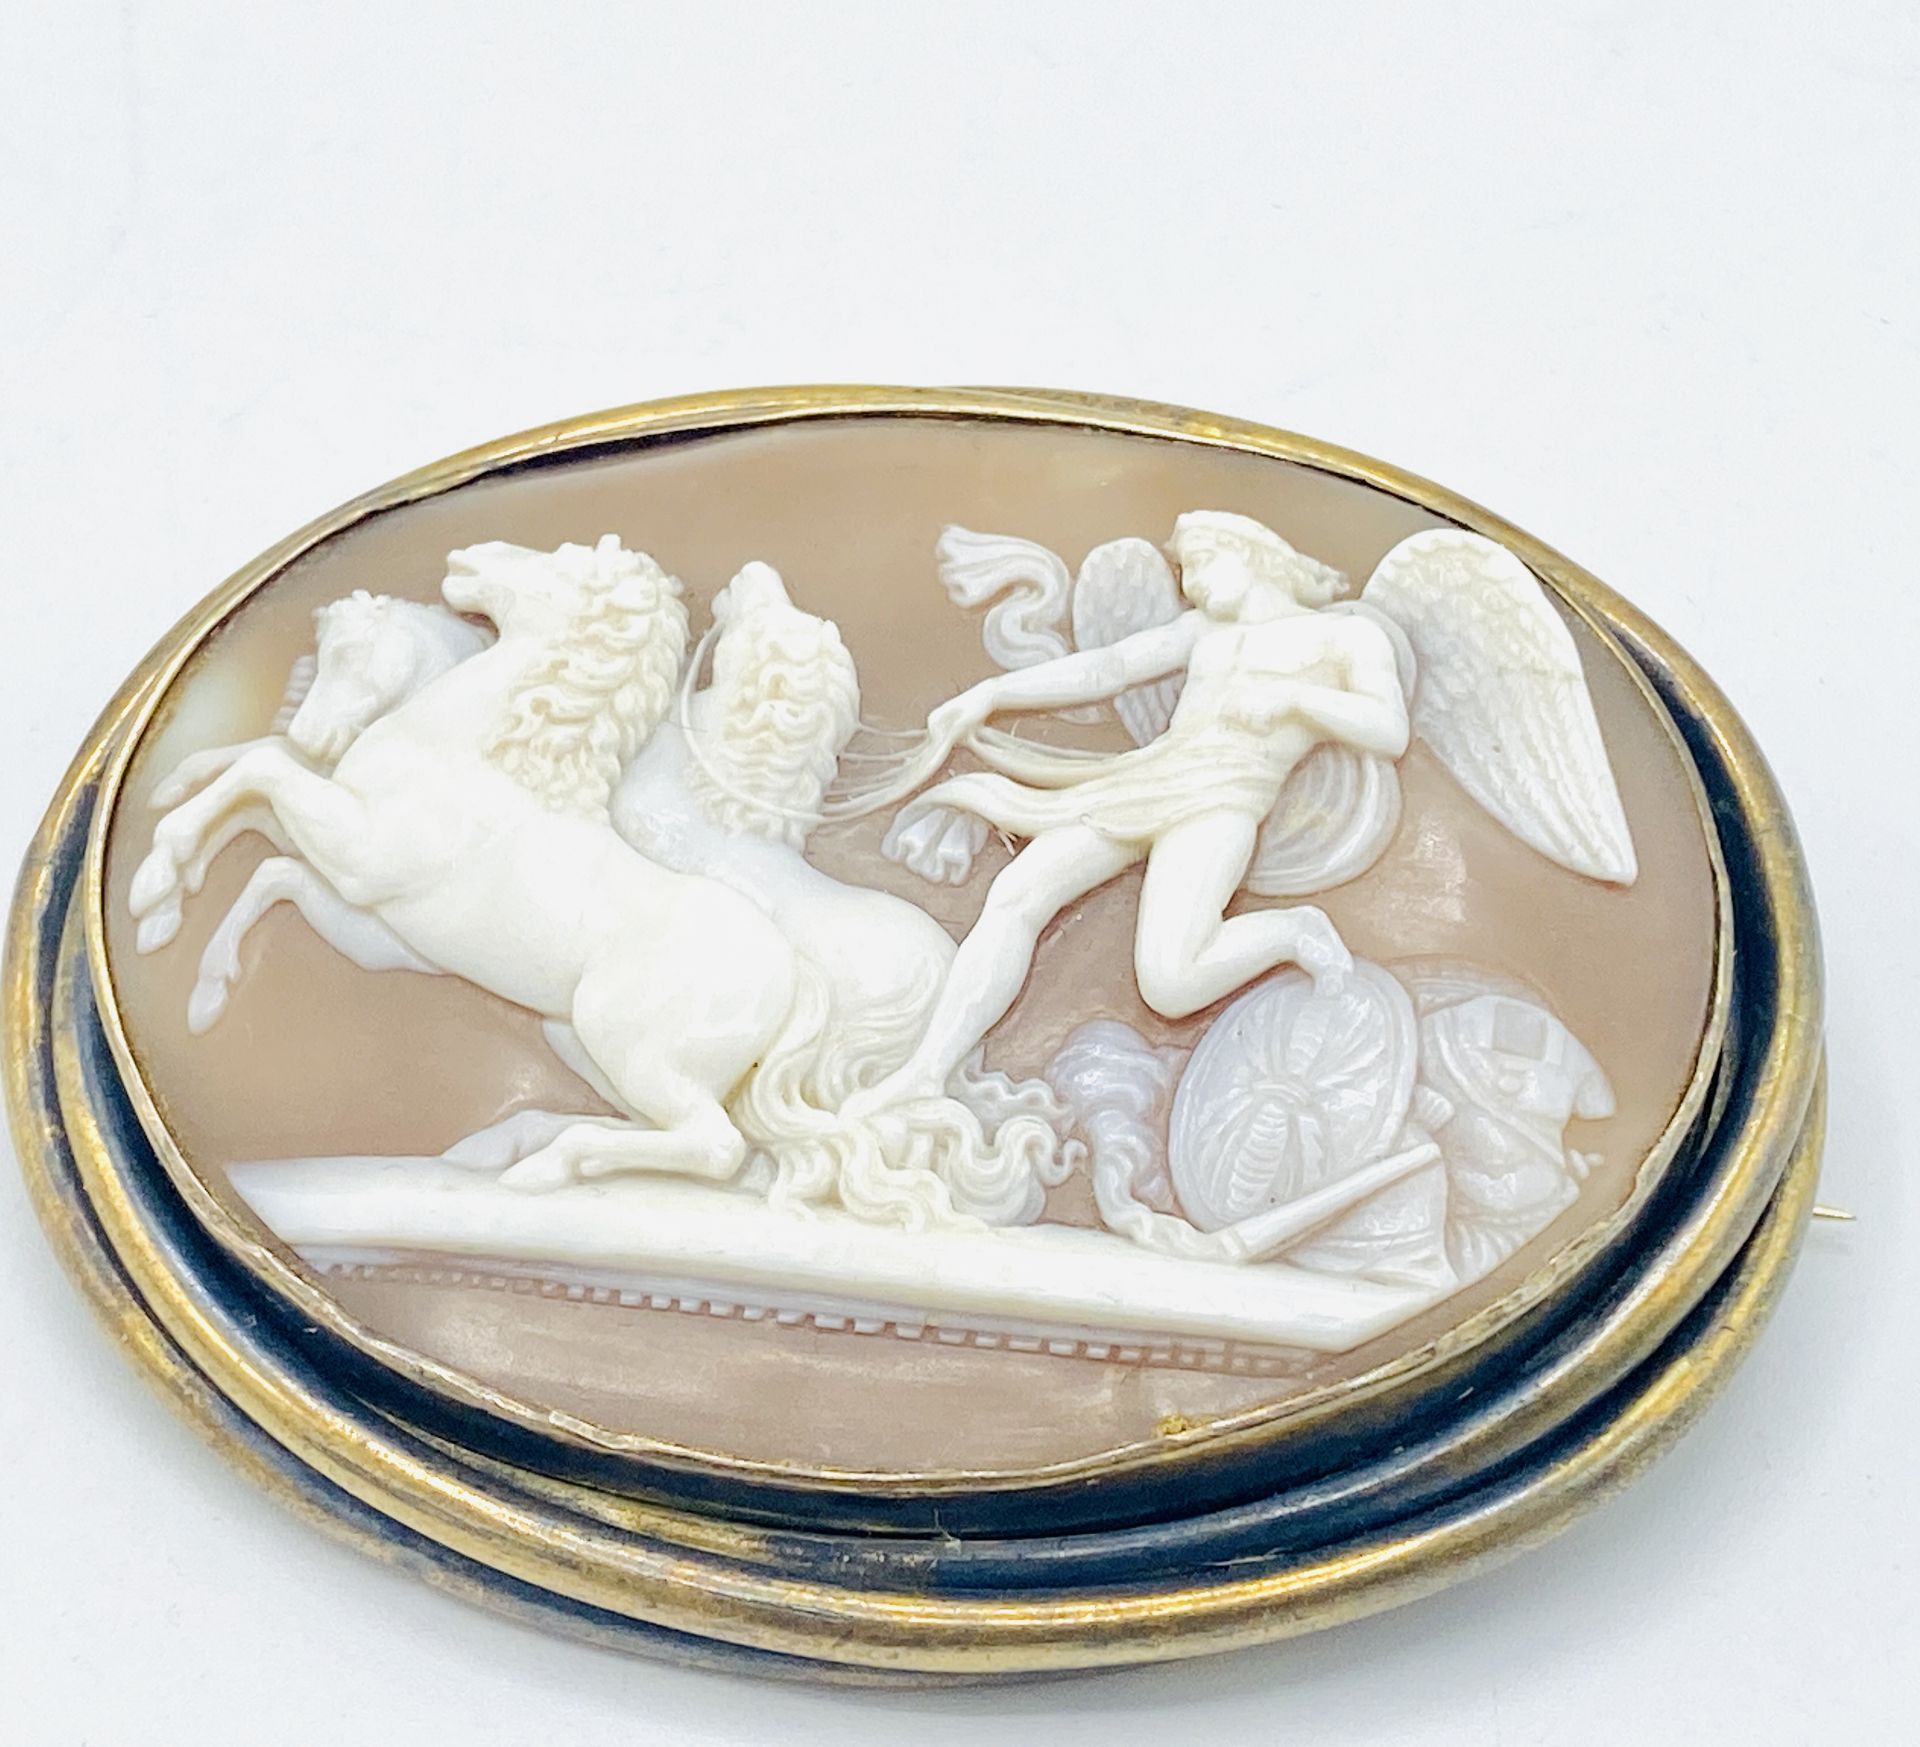 15ct gold cameo brooch